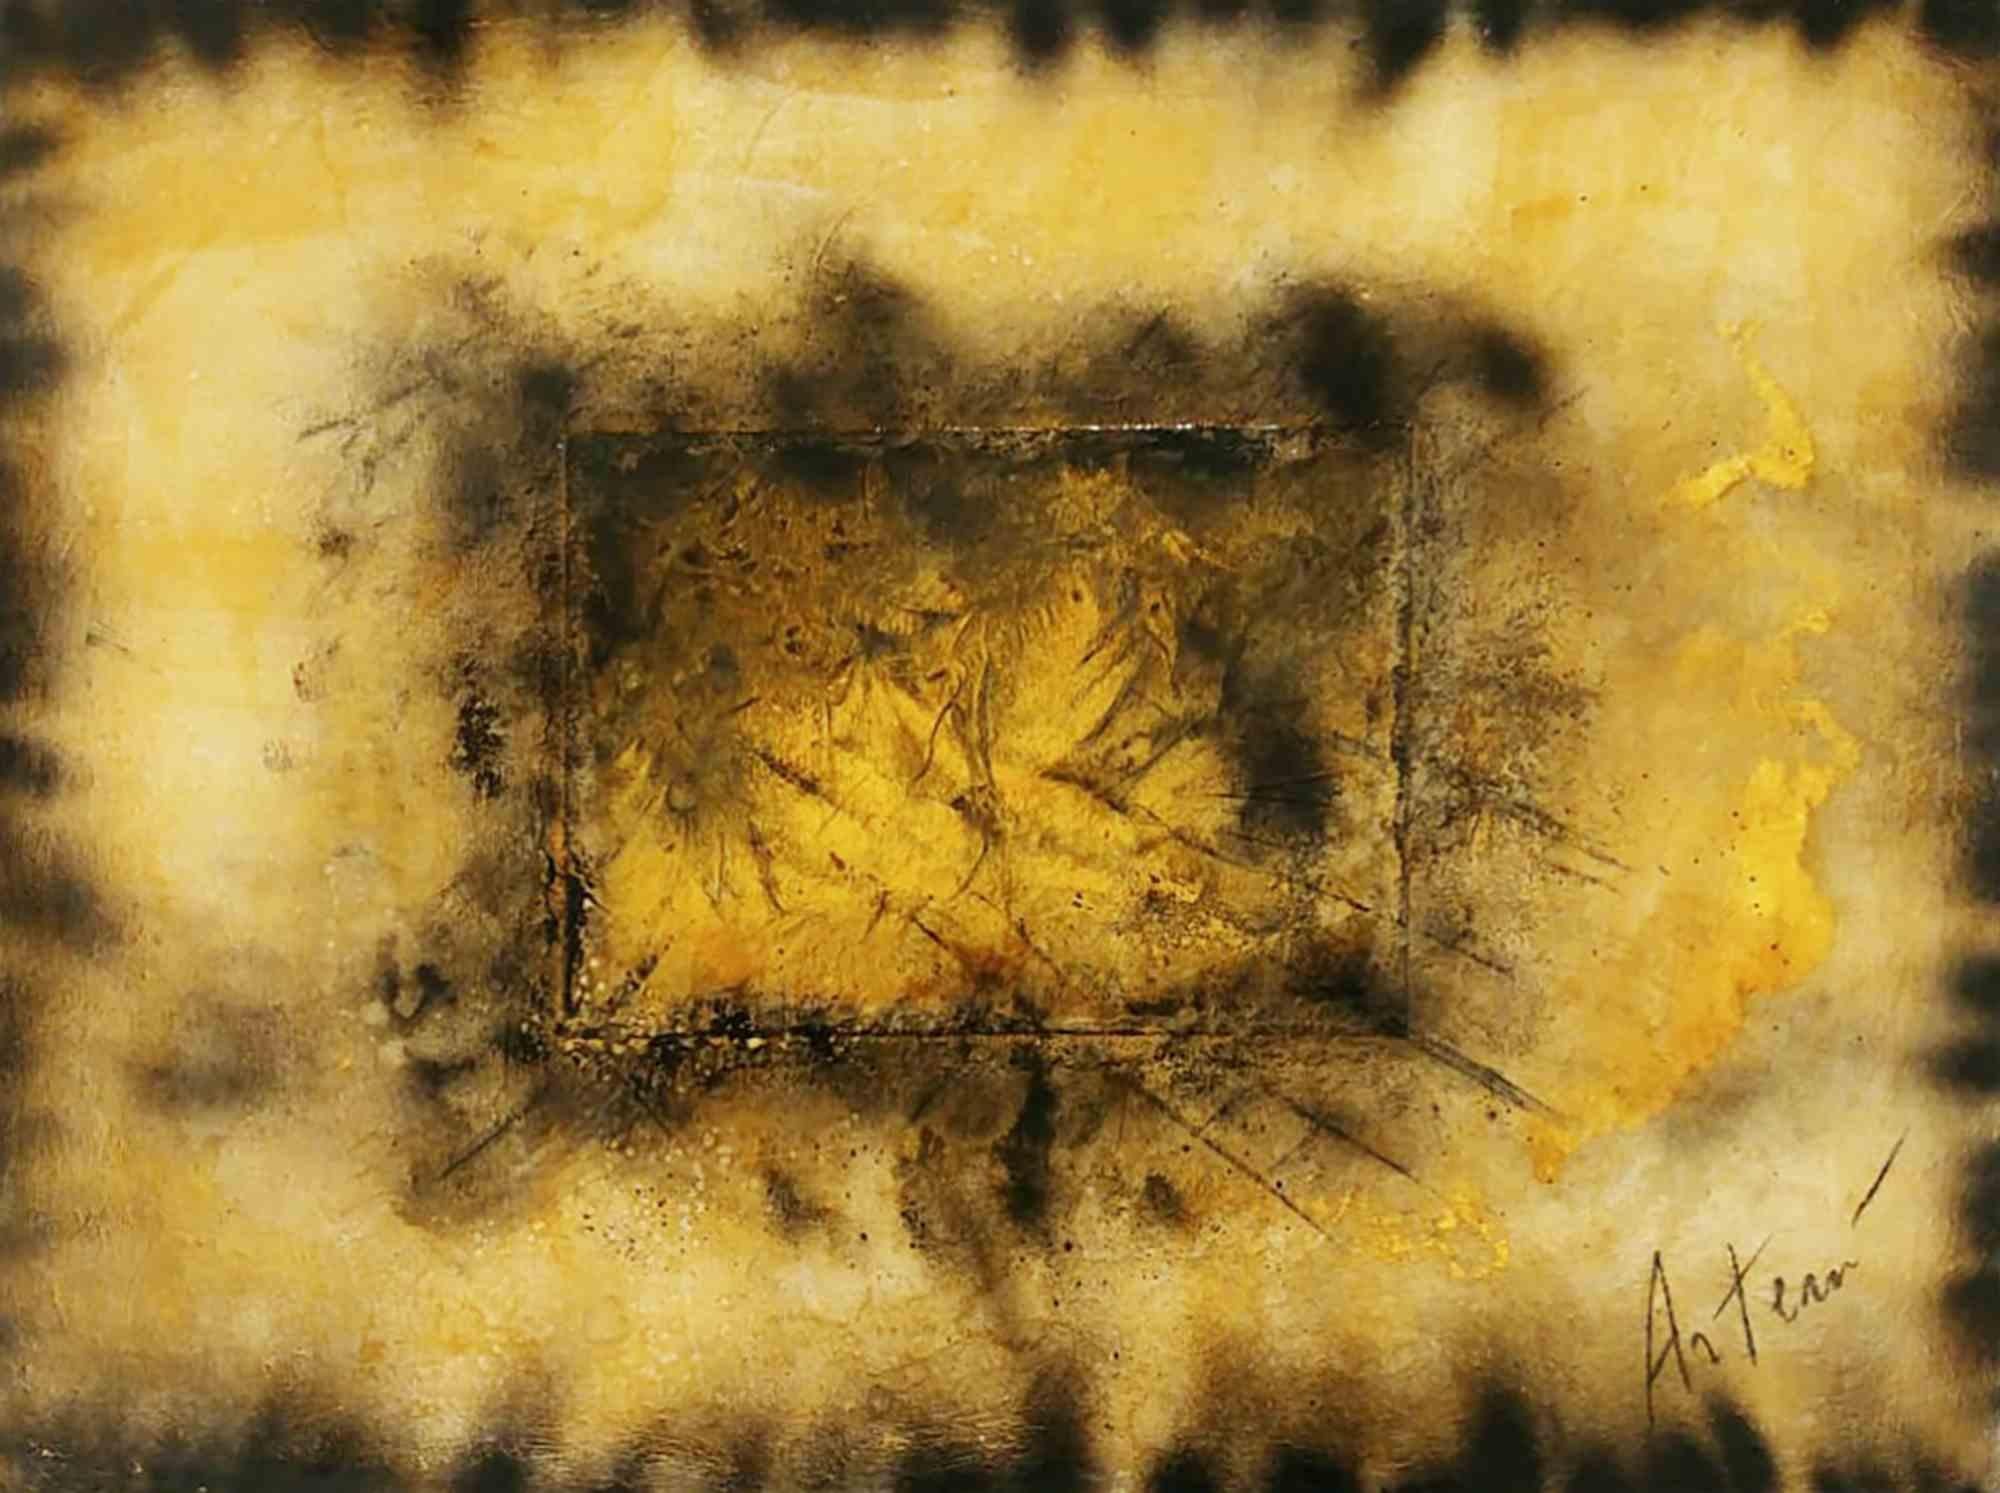 The work is entitled 'Scorci d'infinito black border n.4' and is part of the 'Scorci di infinito' series measuring 80 × 60 cm by the artist Artemio Ceresa. The technique is mixed media on canvas and the signature on the front is Artemio . The work